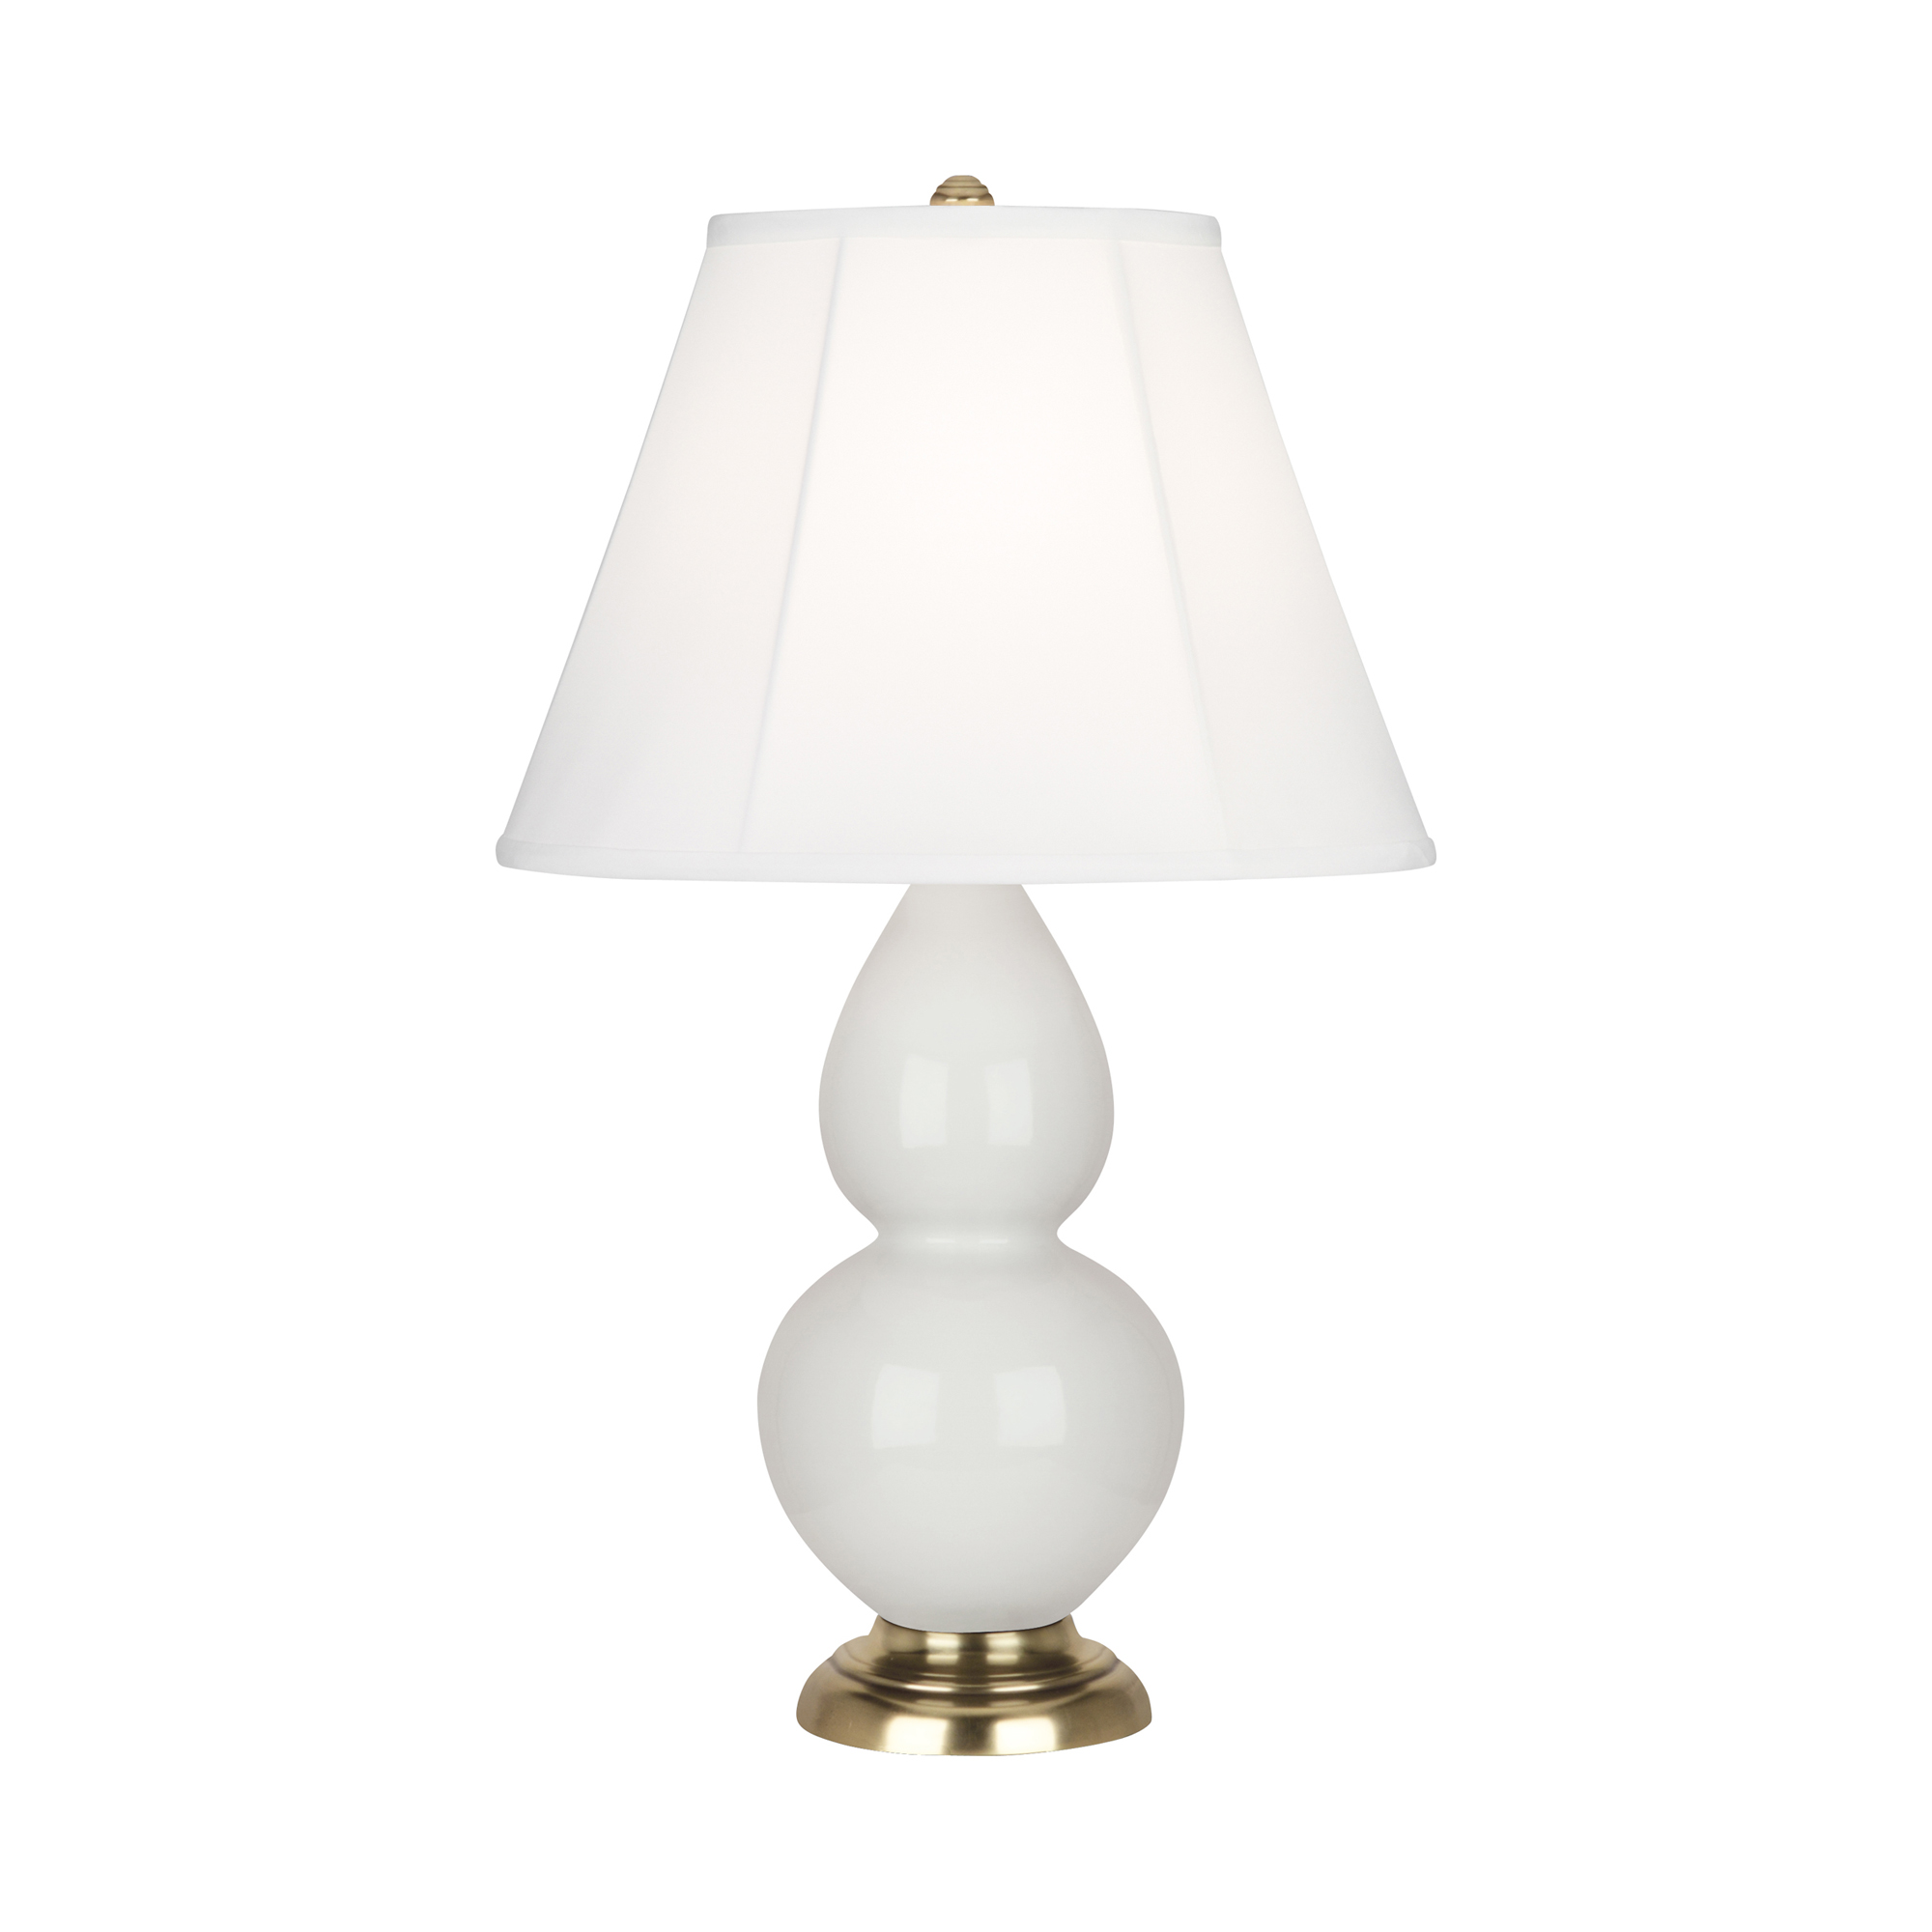 Small Double Gourd Accent Lamp Style #1680